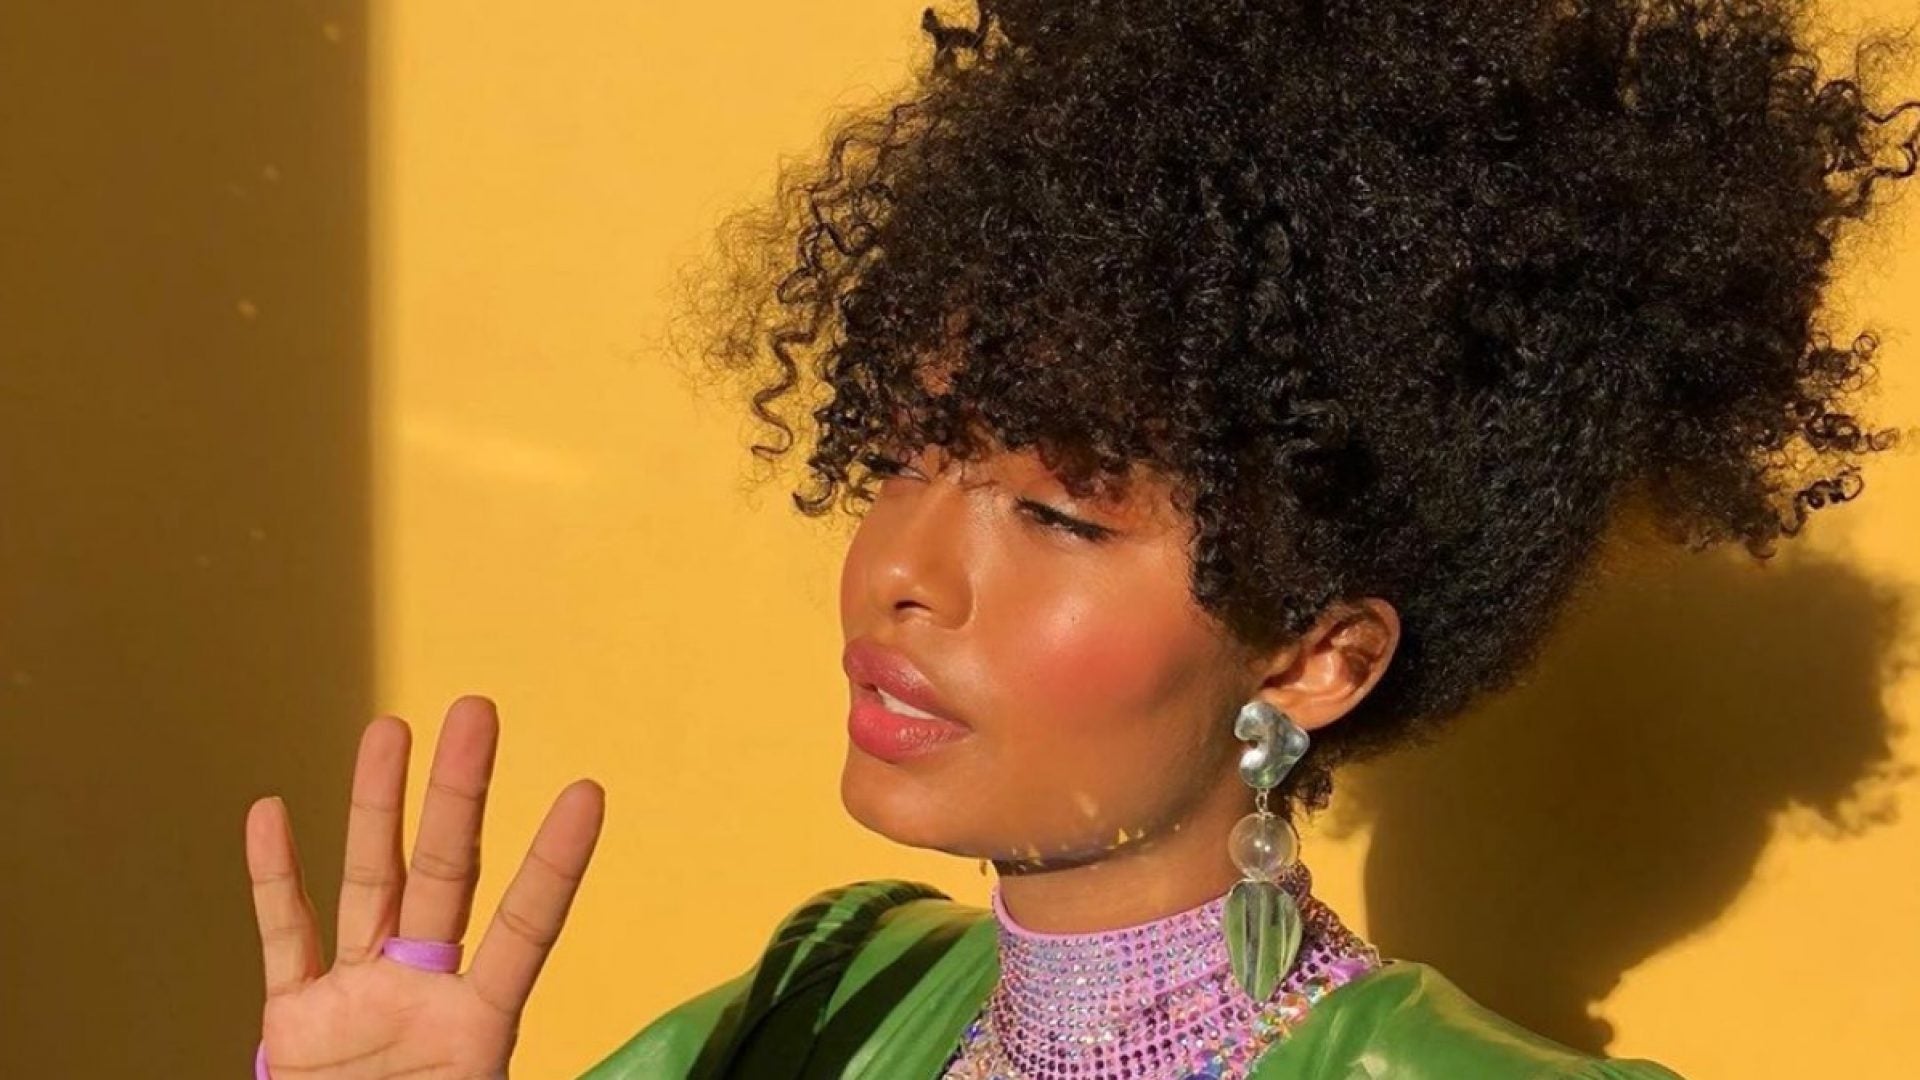 Yara Shahidi To Star As Tinker Bell In Live-Action ‘Peter Pan’ Remake